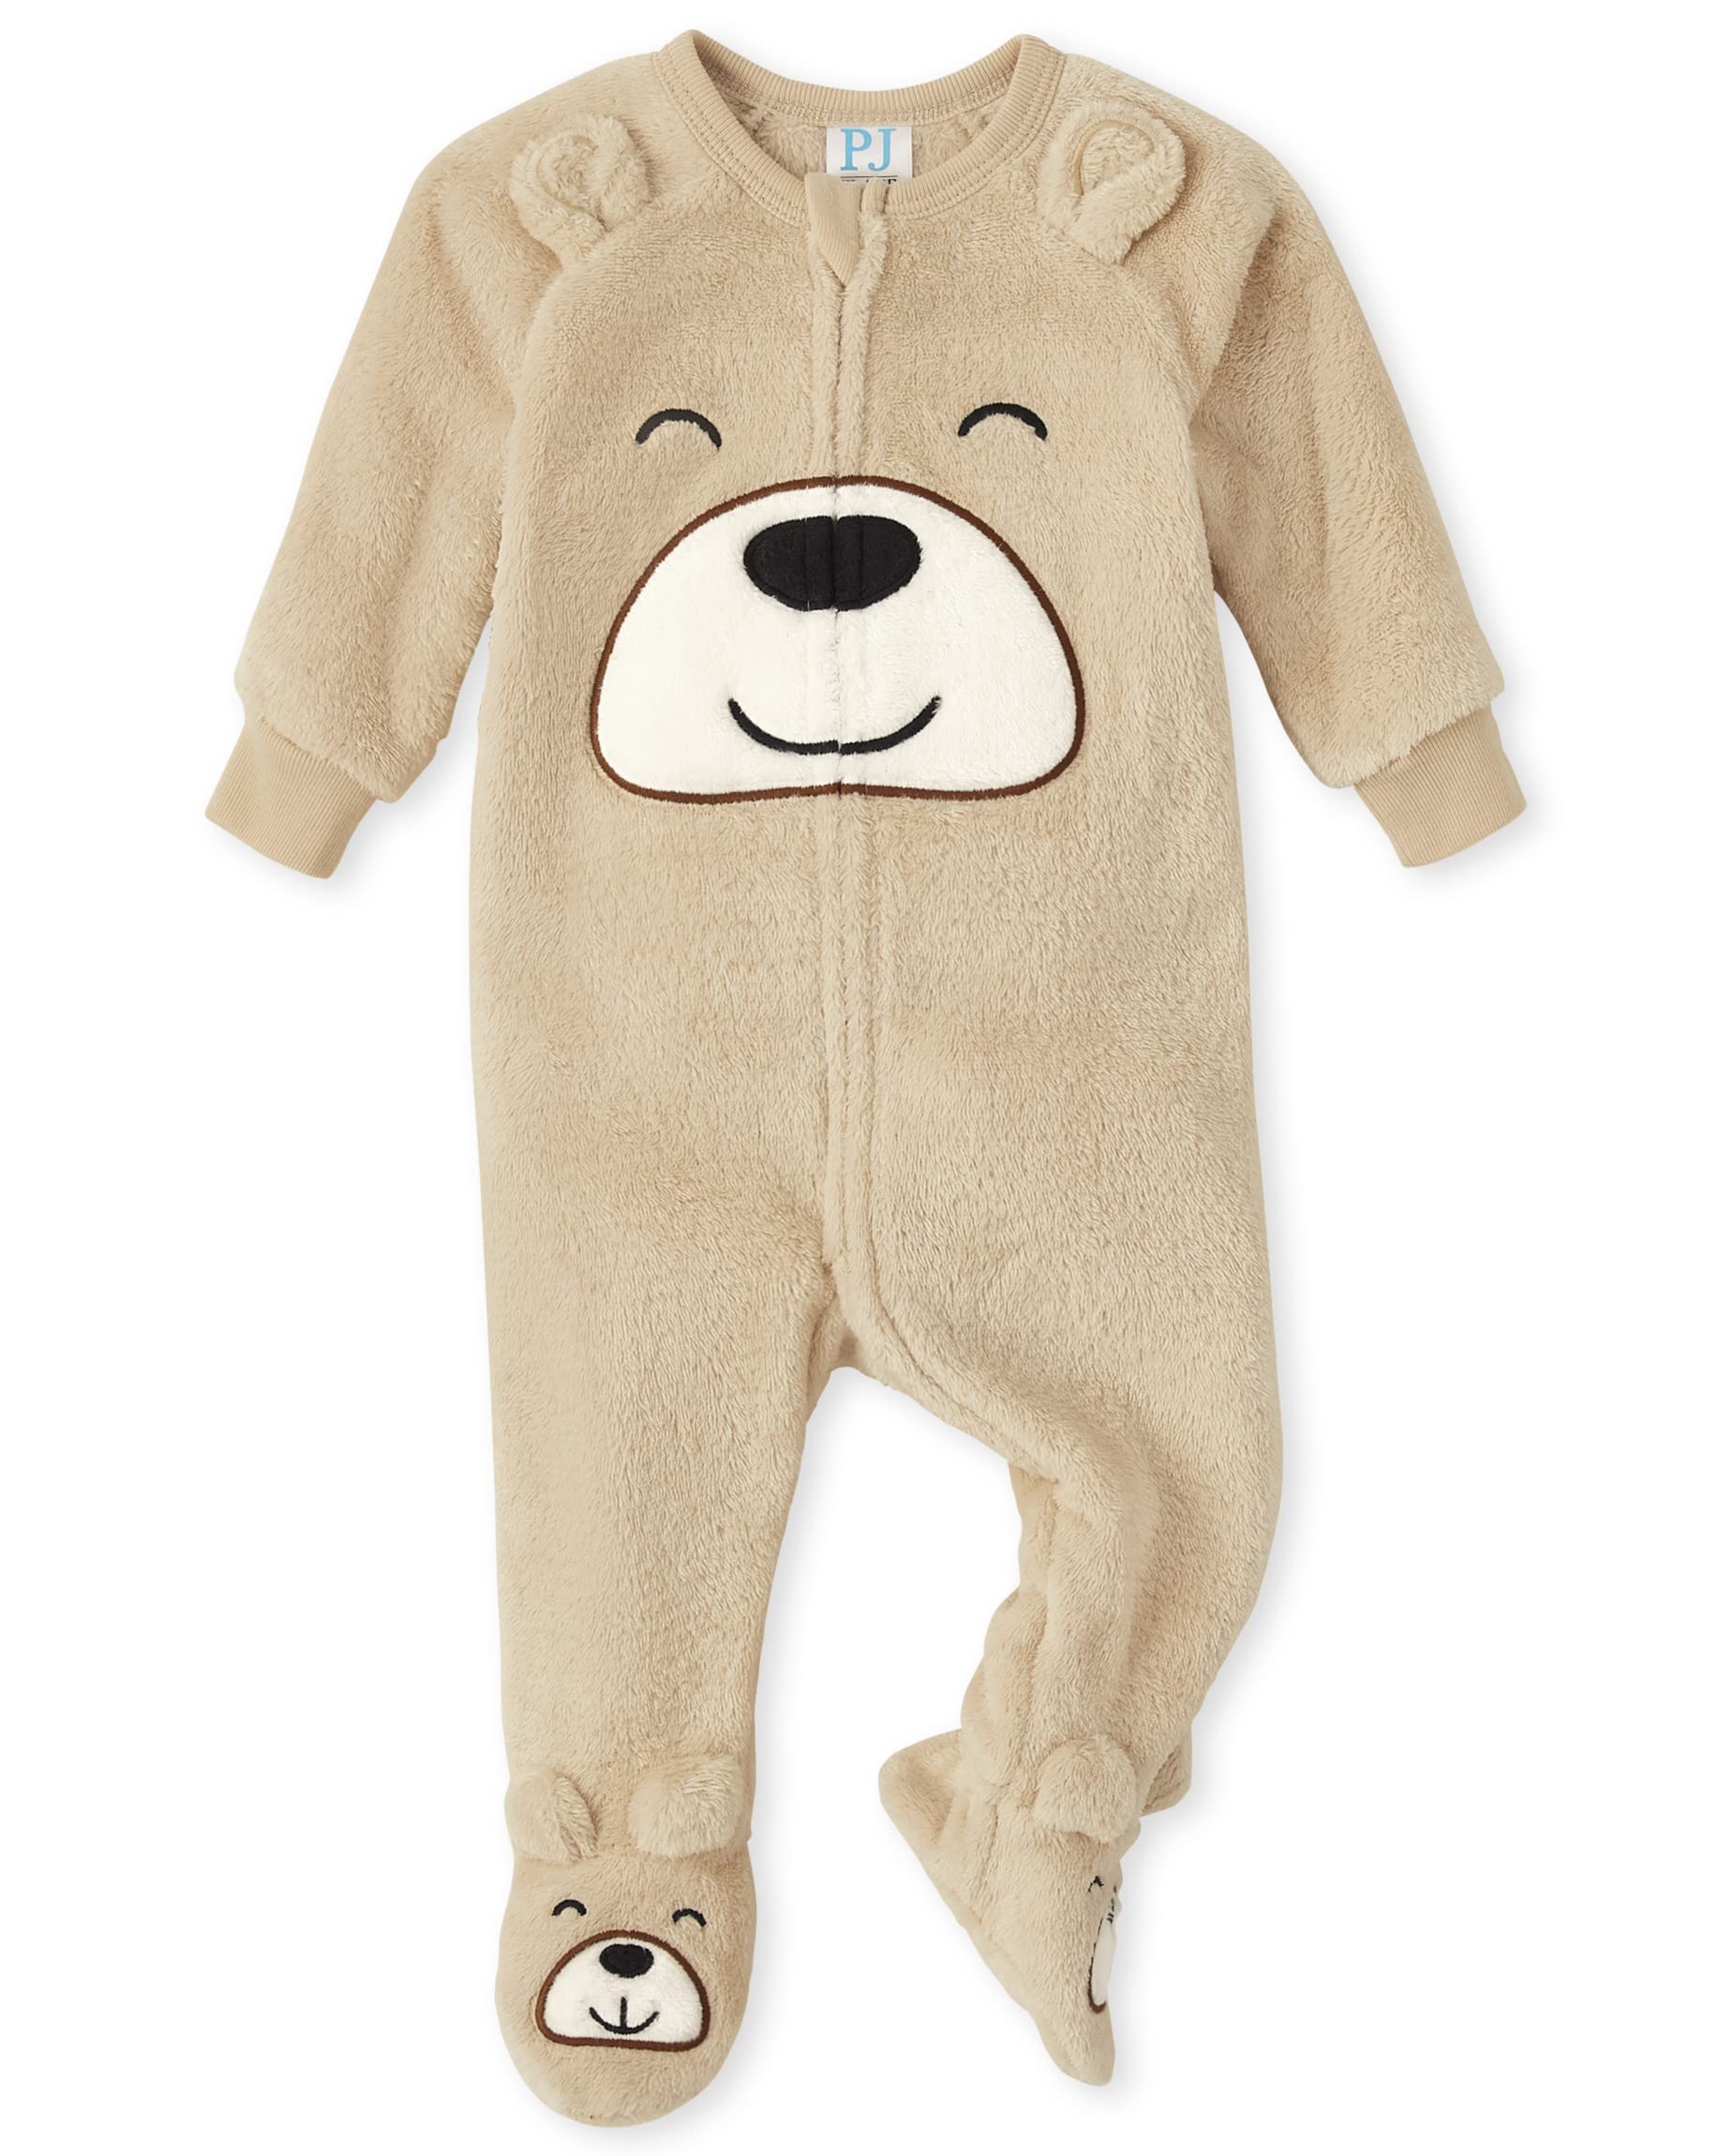 The Children's Place Baby and Toddler Fleece Zip-Front One Piece Footed Pajama